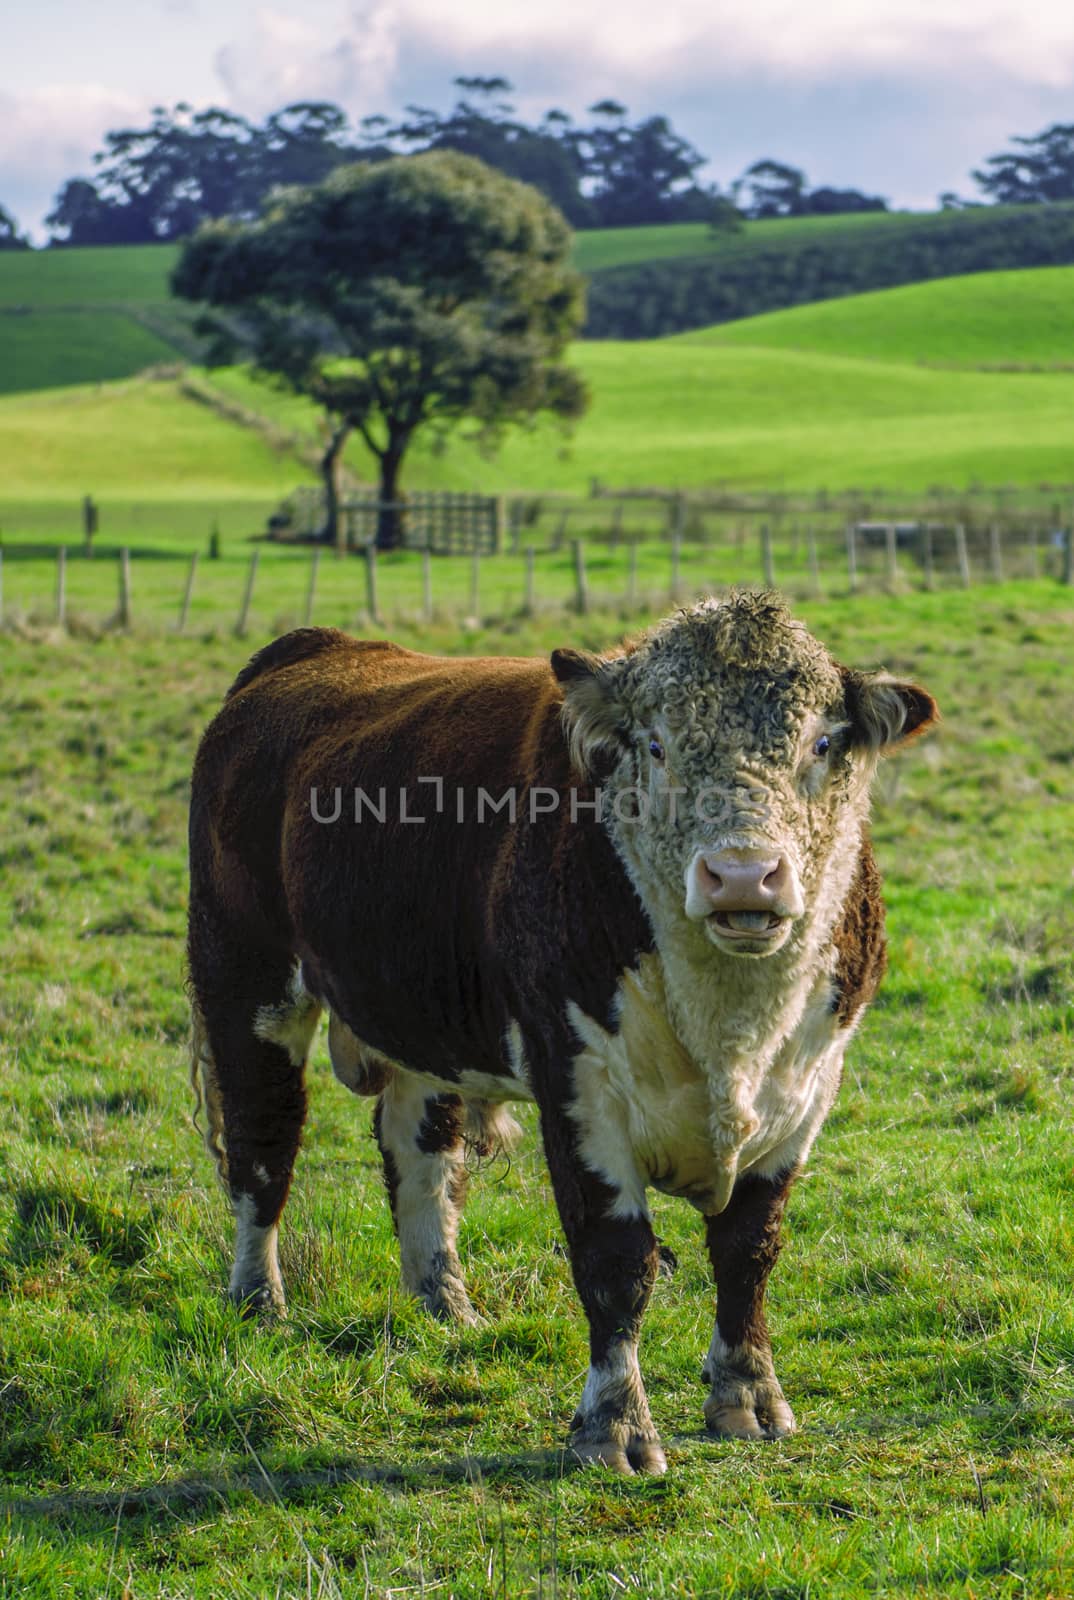 Bull in the country side of Tasmania. by artistrobd